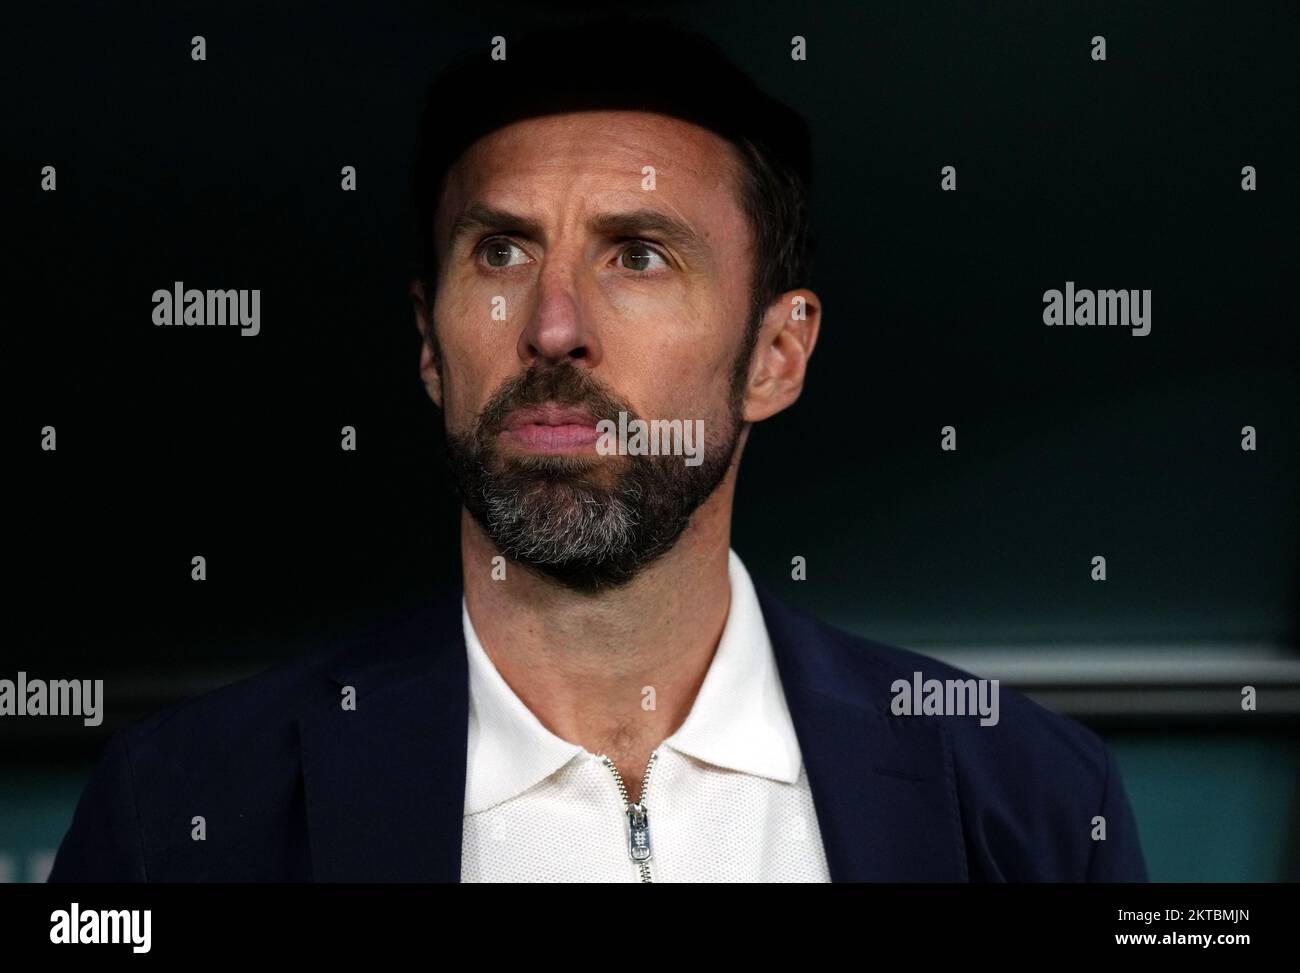 England manager Gareth Southgate during the FIFA World Cup Group B match at the Ahmad Bin Ali Stadium, Al Rayyan, Qatar. Picture date: Tuesday November 29, 2022. Stock Photo